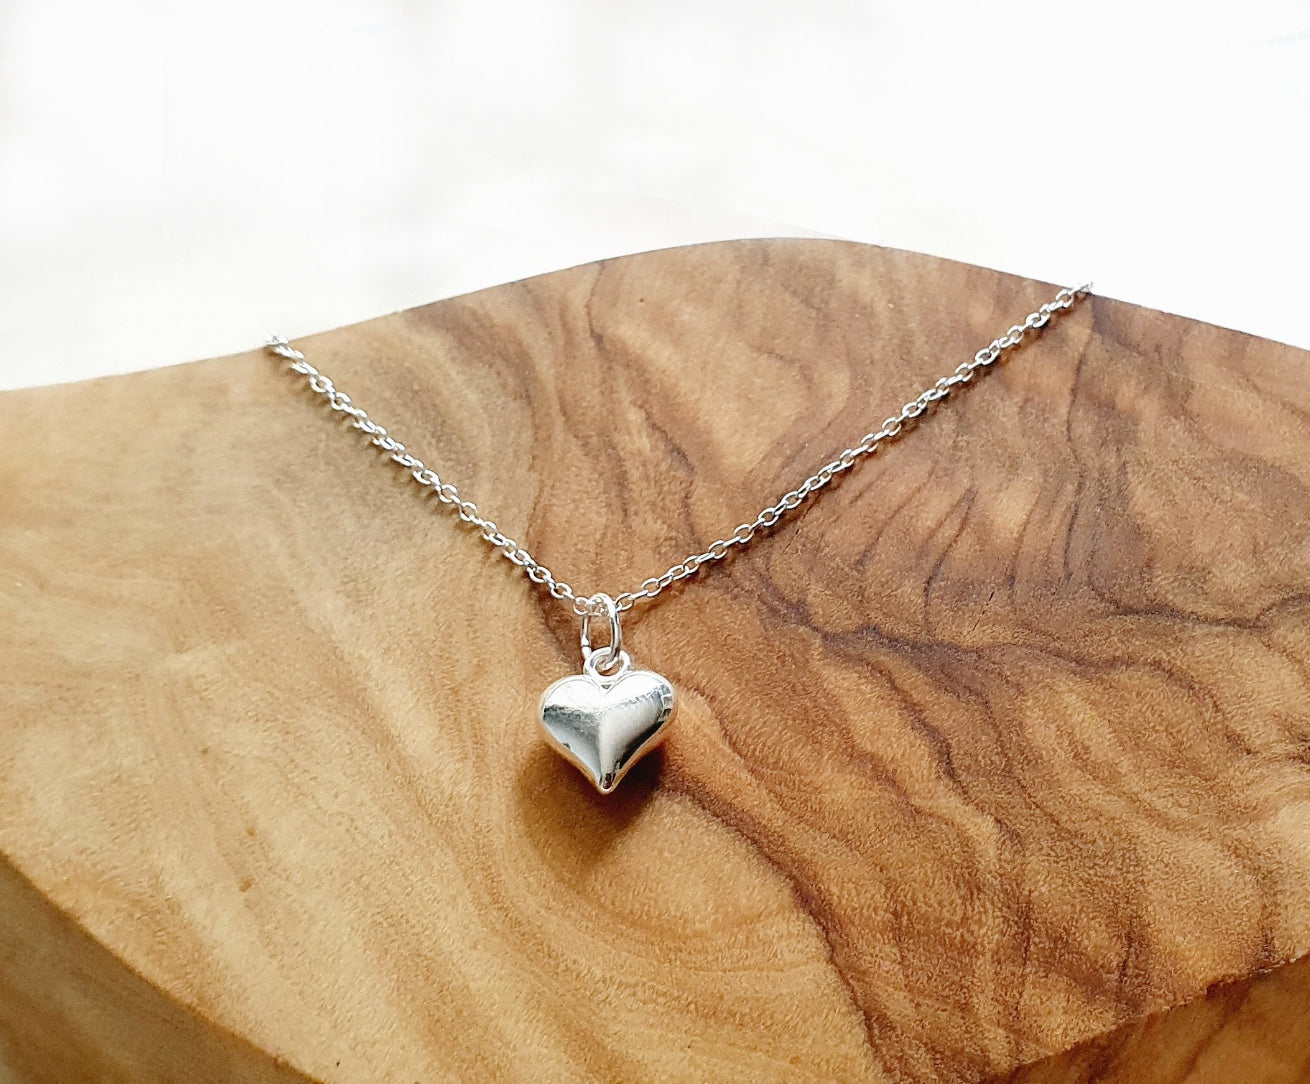 New Big Sister Puffy Heart Necklace in Sterling Silver 925, Personalised Gift